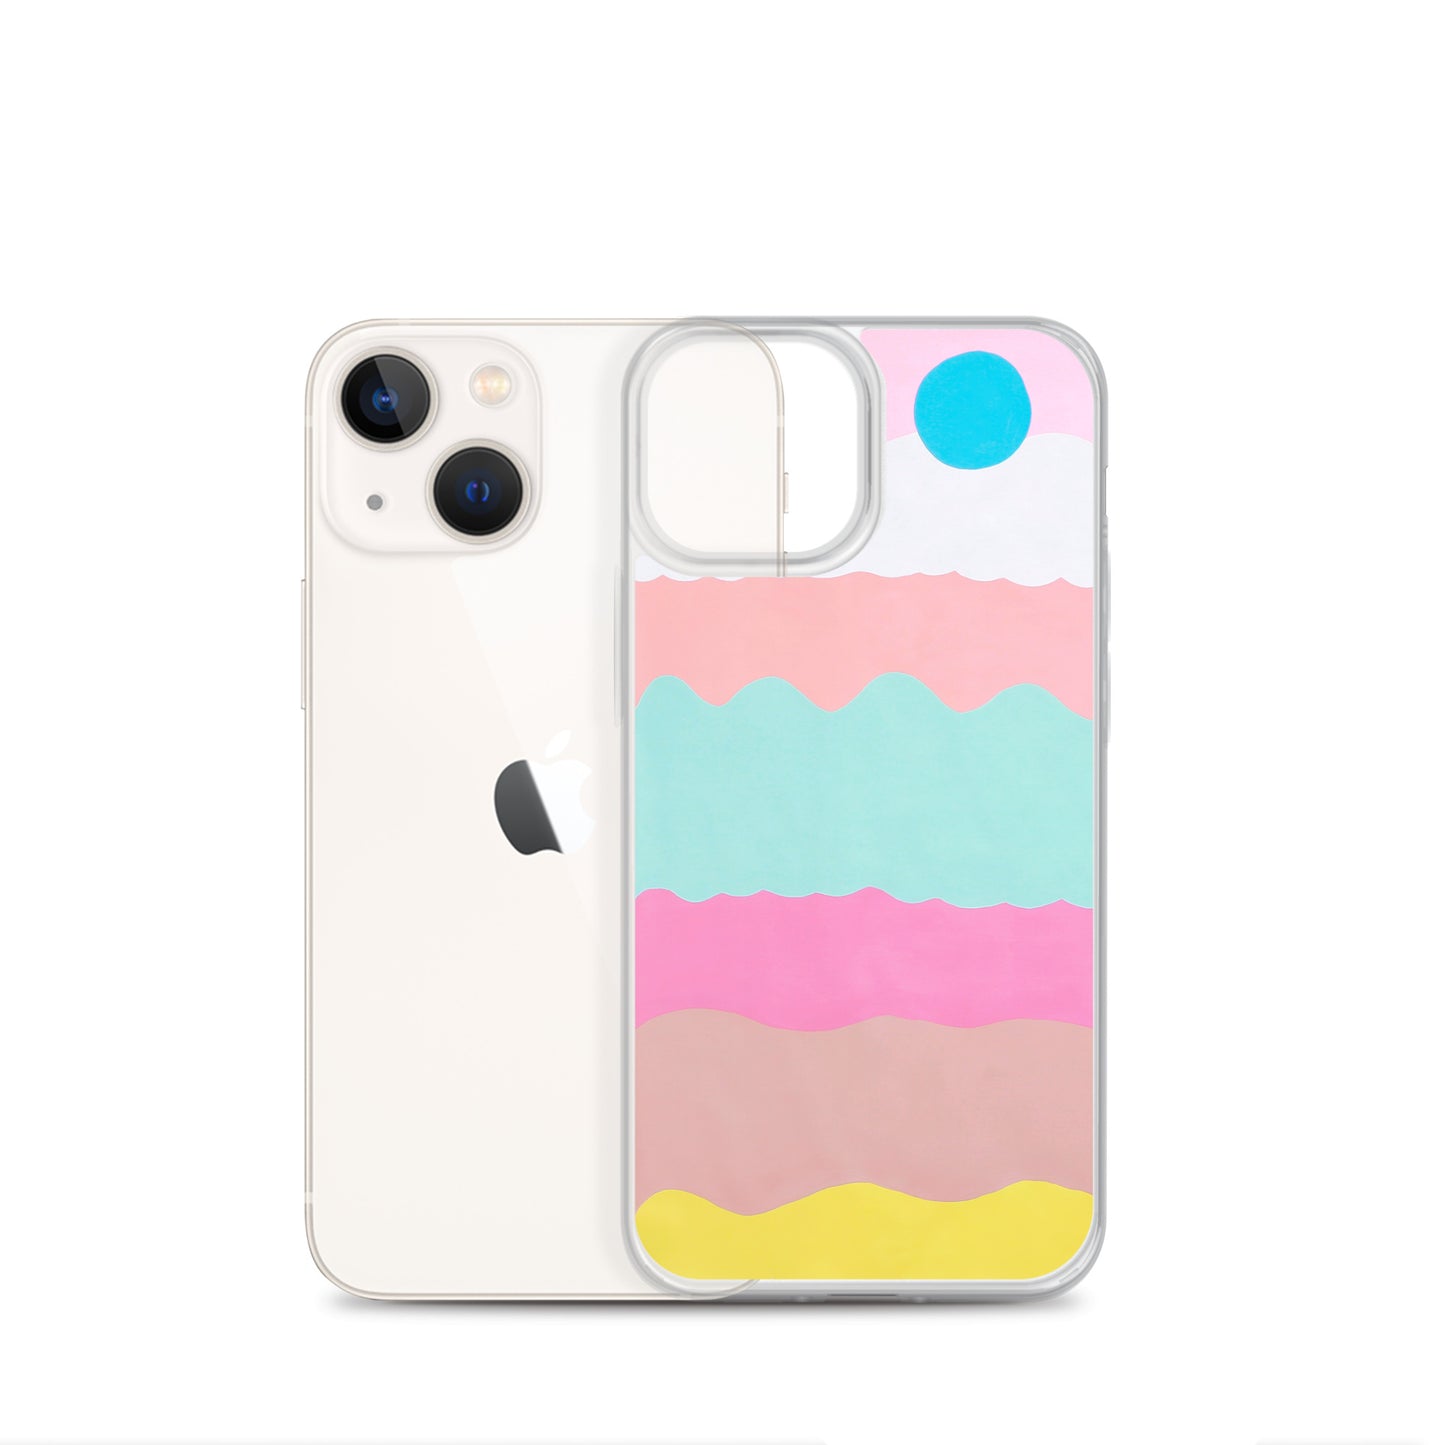 This is Love iPhone Case